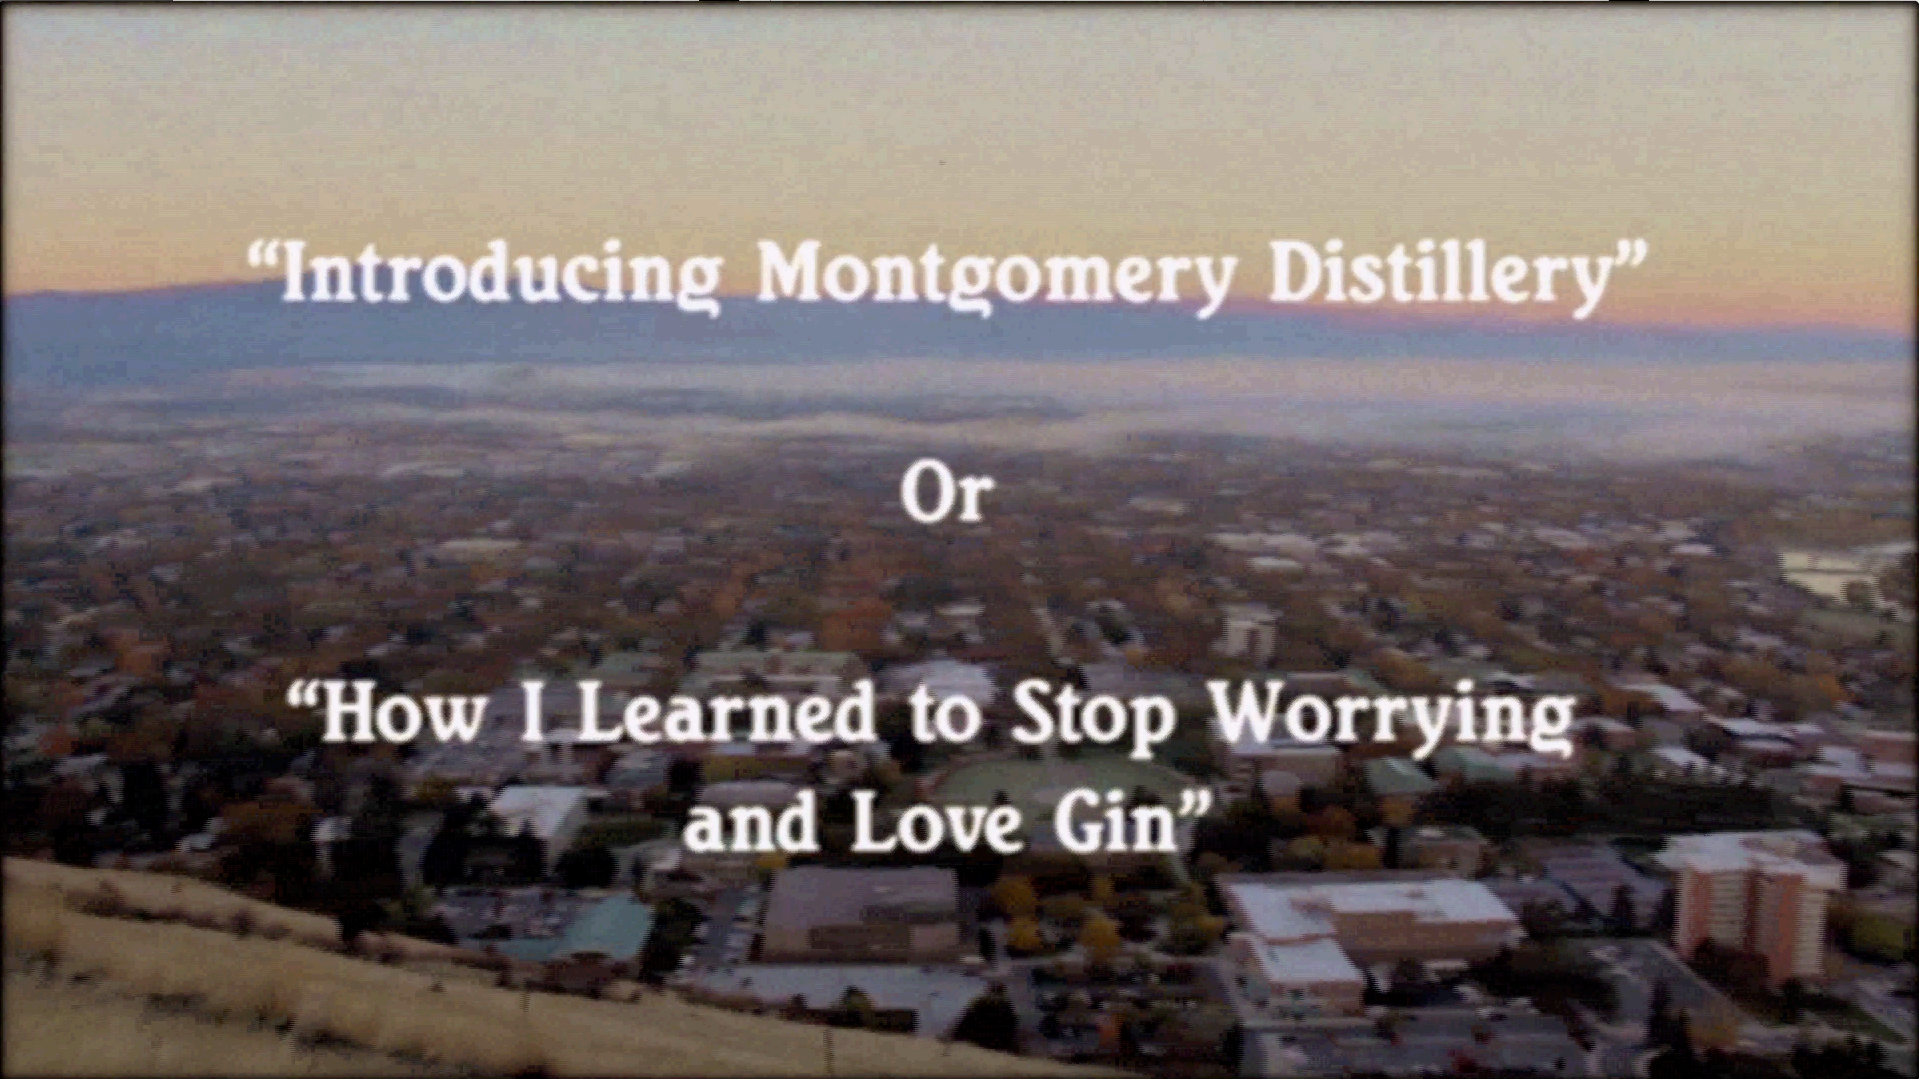 How I Learned to Stop Worrying and Love Gin